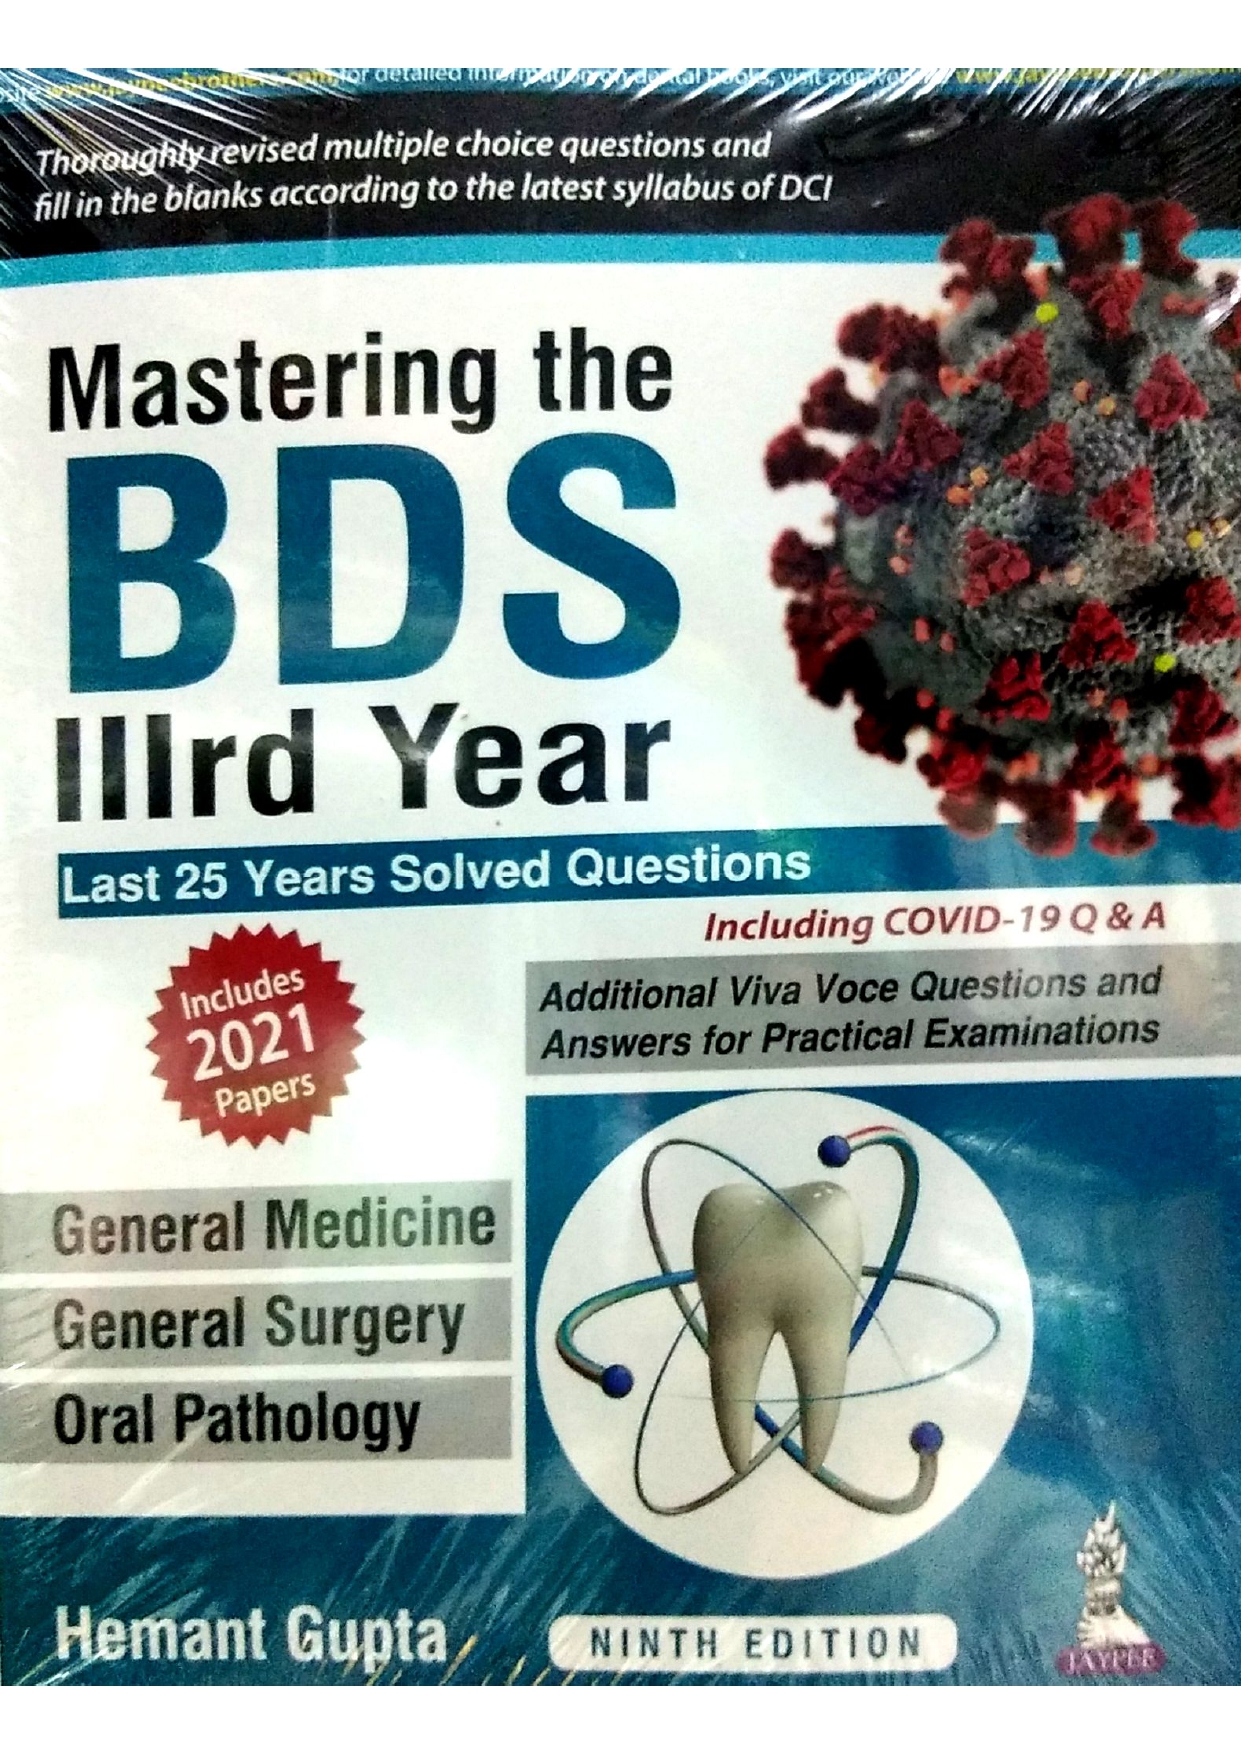 Mastering The Bds 3Rd Year (Old Edition)